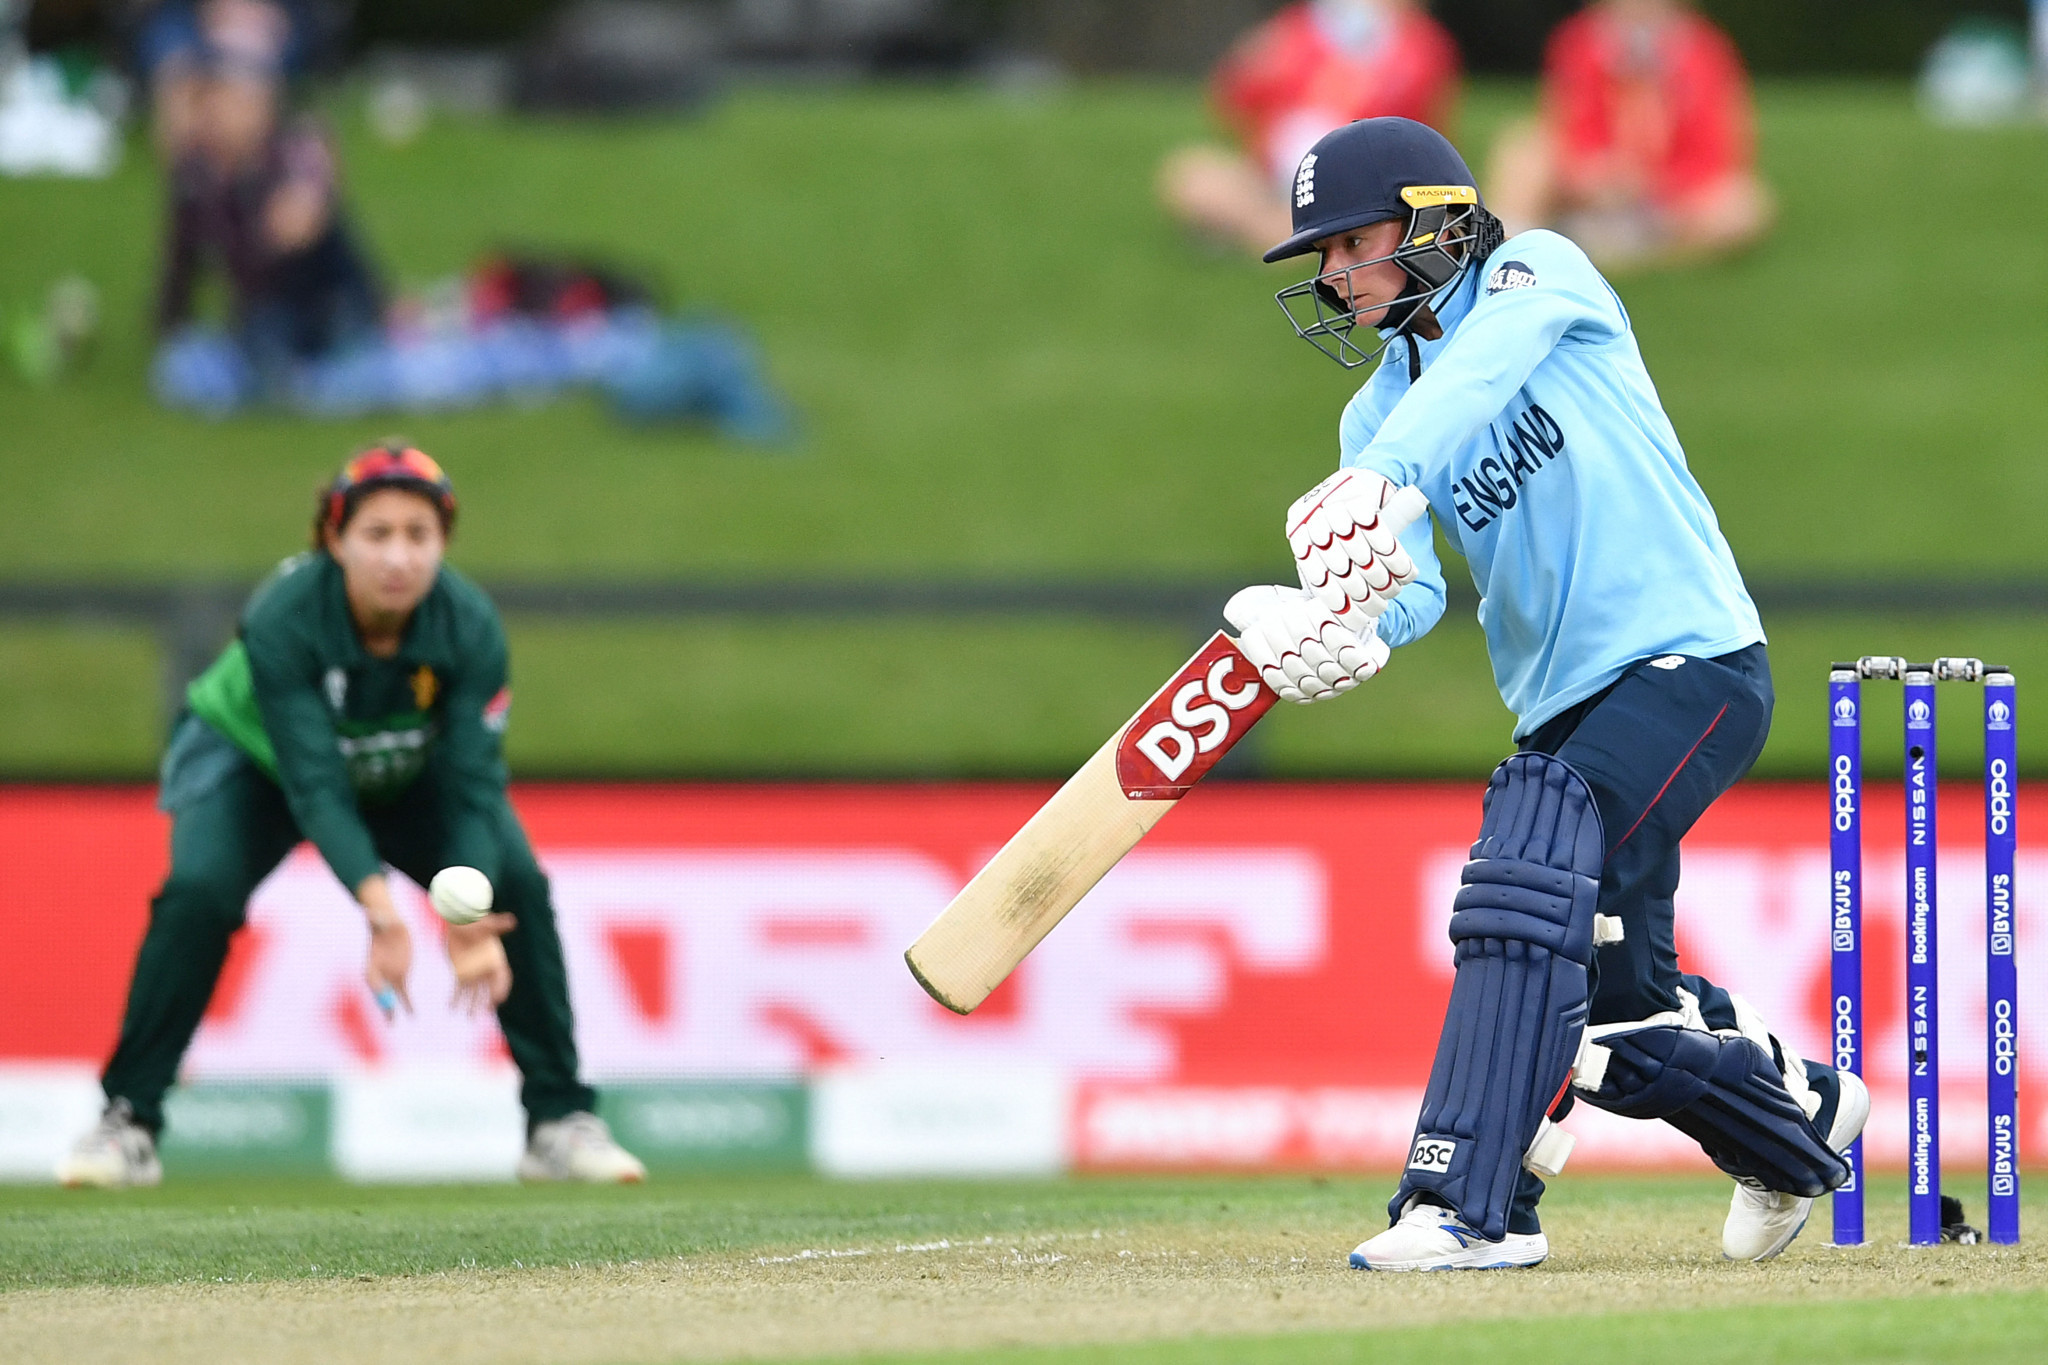 Holders England move a win away from qualifying for Women’s Cricket World Cup semi-finals after big victory over Pakistan